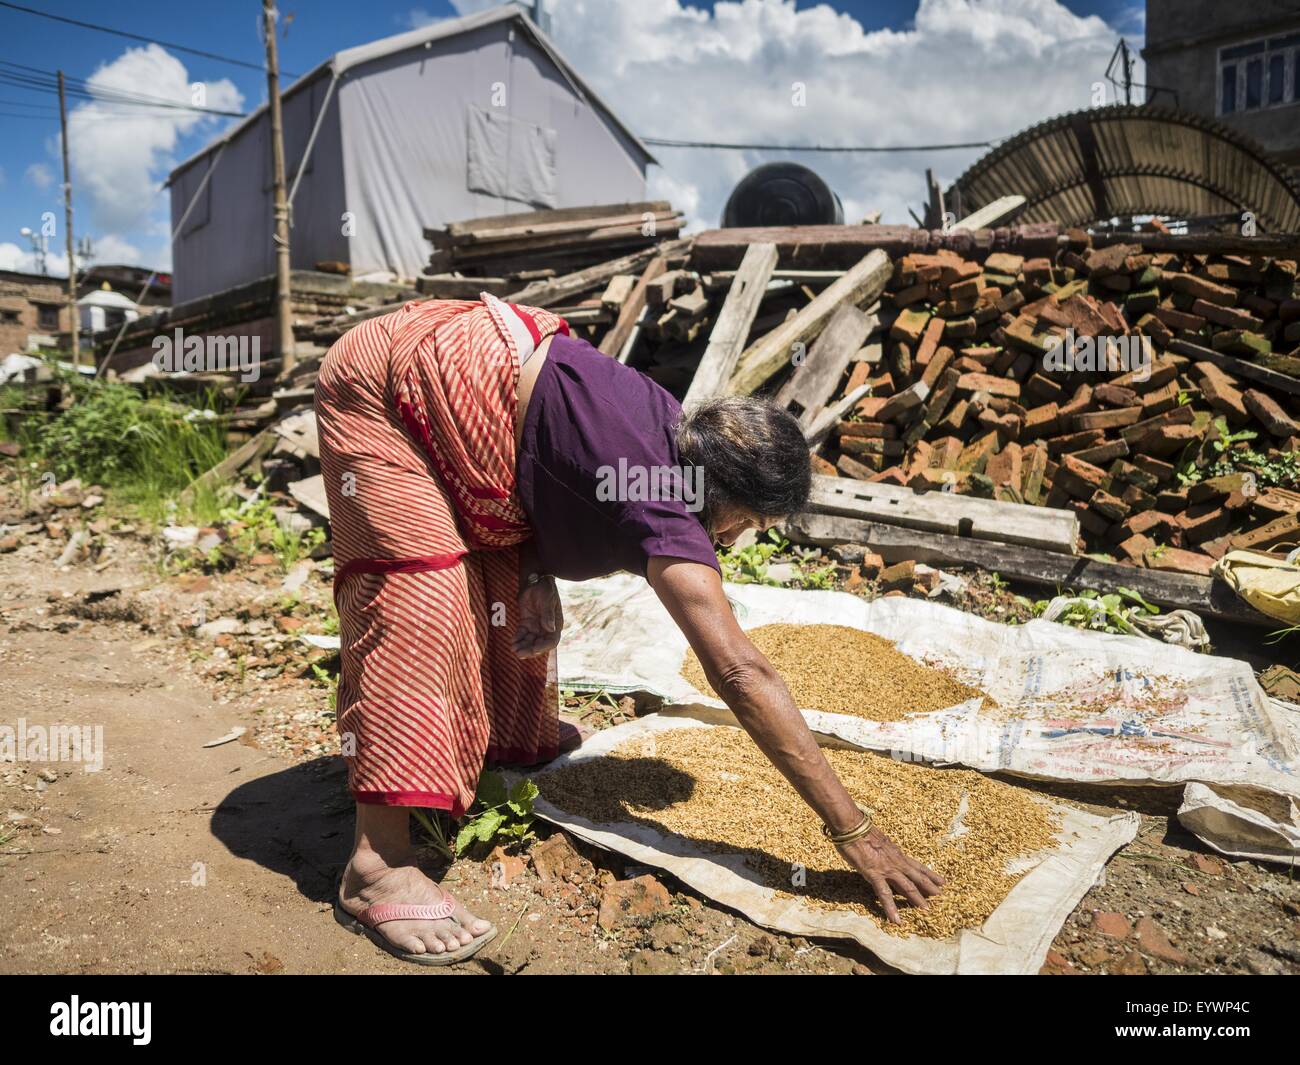 Sankhu, Central Region, Nepal. 3rd Aug, 2015. A woman whose home was destroyed by the earthquake dries rice in front of the rubble of her home in Sankhu, a community about 90 minutes from central Kathmandu. The Nepal Earthquake on April 25, 2015, (also known as the Gorkha earthquake) killed more than 9,000 people and injured more than 23,000. It had a magnitude of 7.8.  It was the worst natural disaster to strike Nepal since the 1934 Nepal''“Bihar earthquake. © ZUMA Press, Inc./Alamy Live News Stock Photo